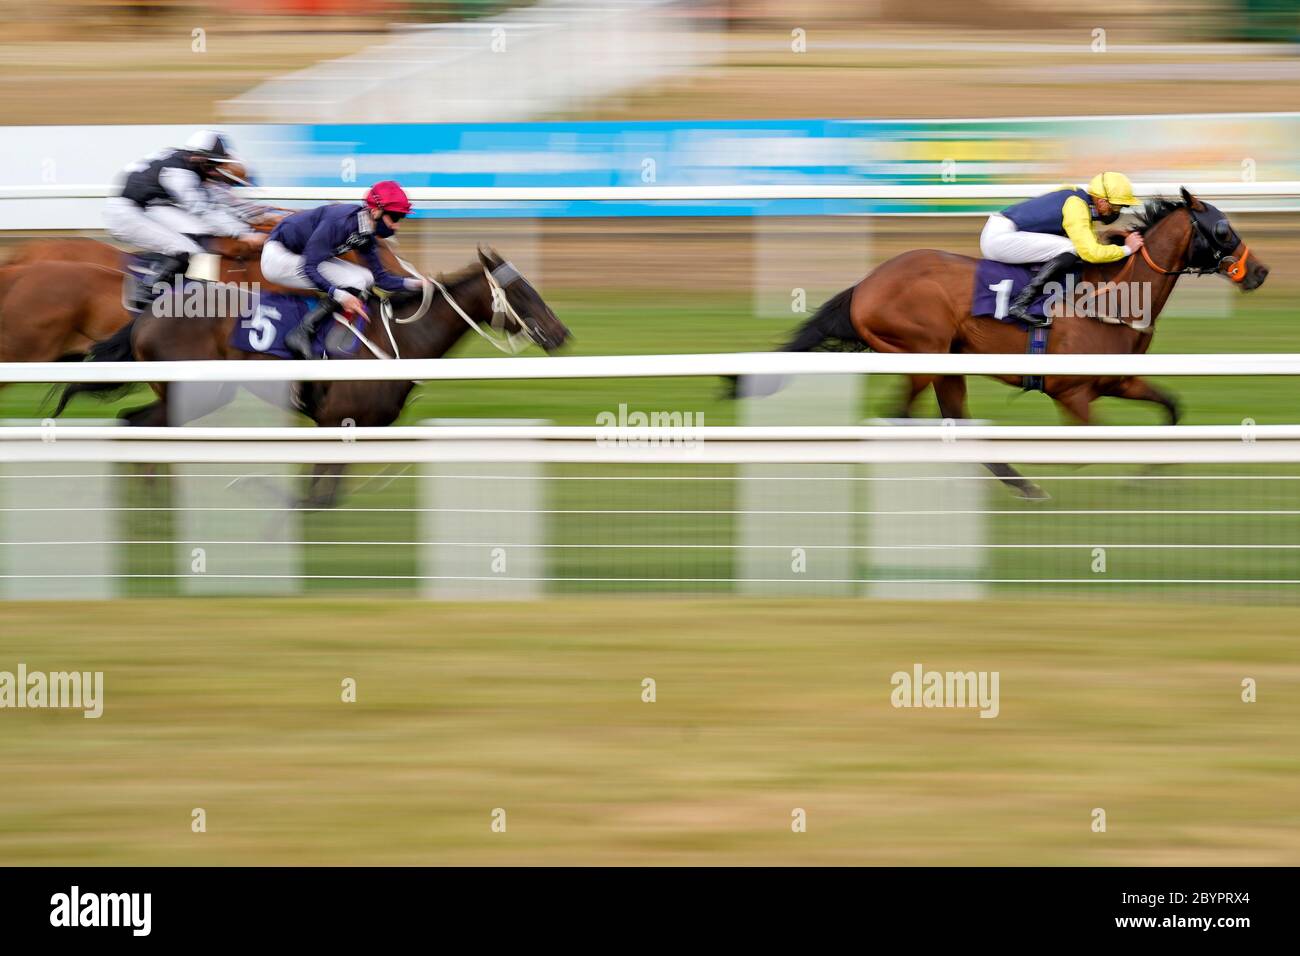 Mythical Madness ridden by James Doyle (right) wins The attheraces.com Handicap at Great Yarmouth Racecourse. Stock Photo